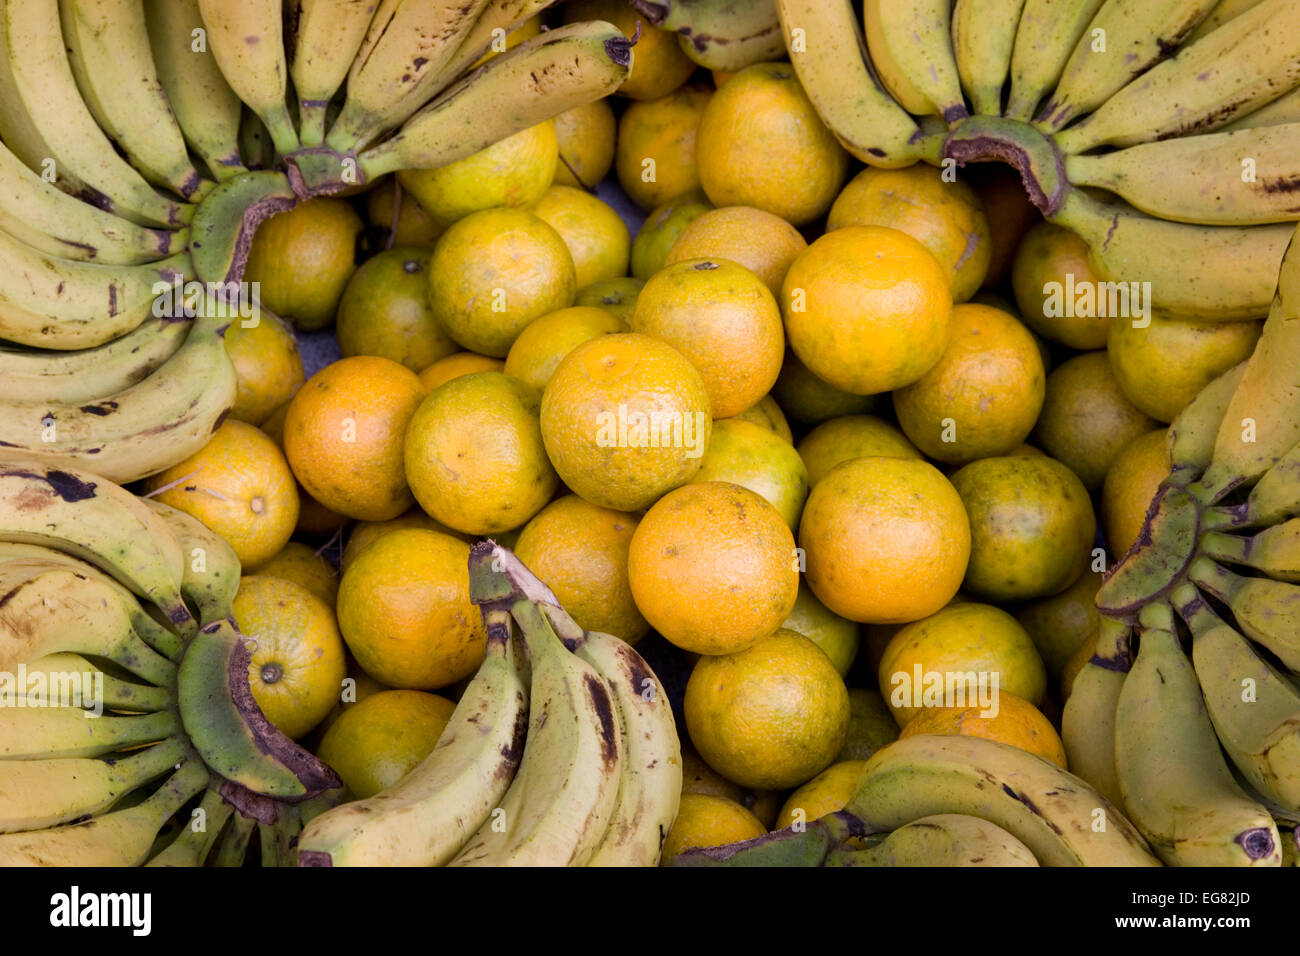 Oranges, bananas and Sweet limes for sale at a street market in Mumbai, India. Stock Photo